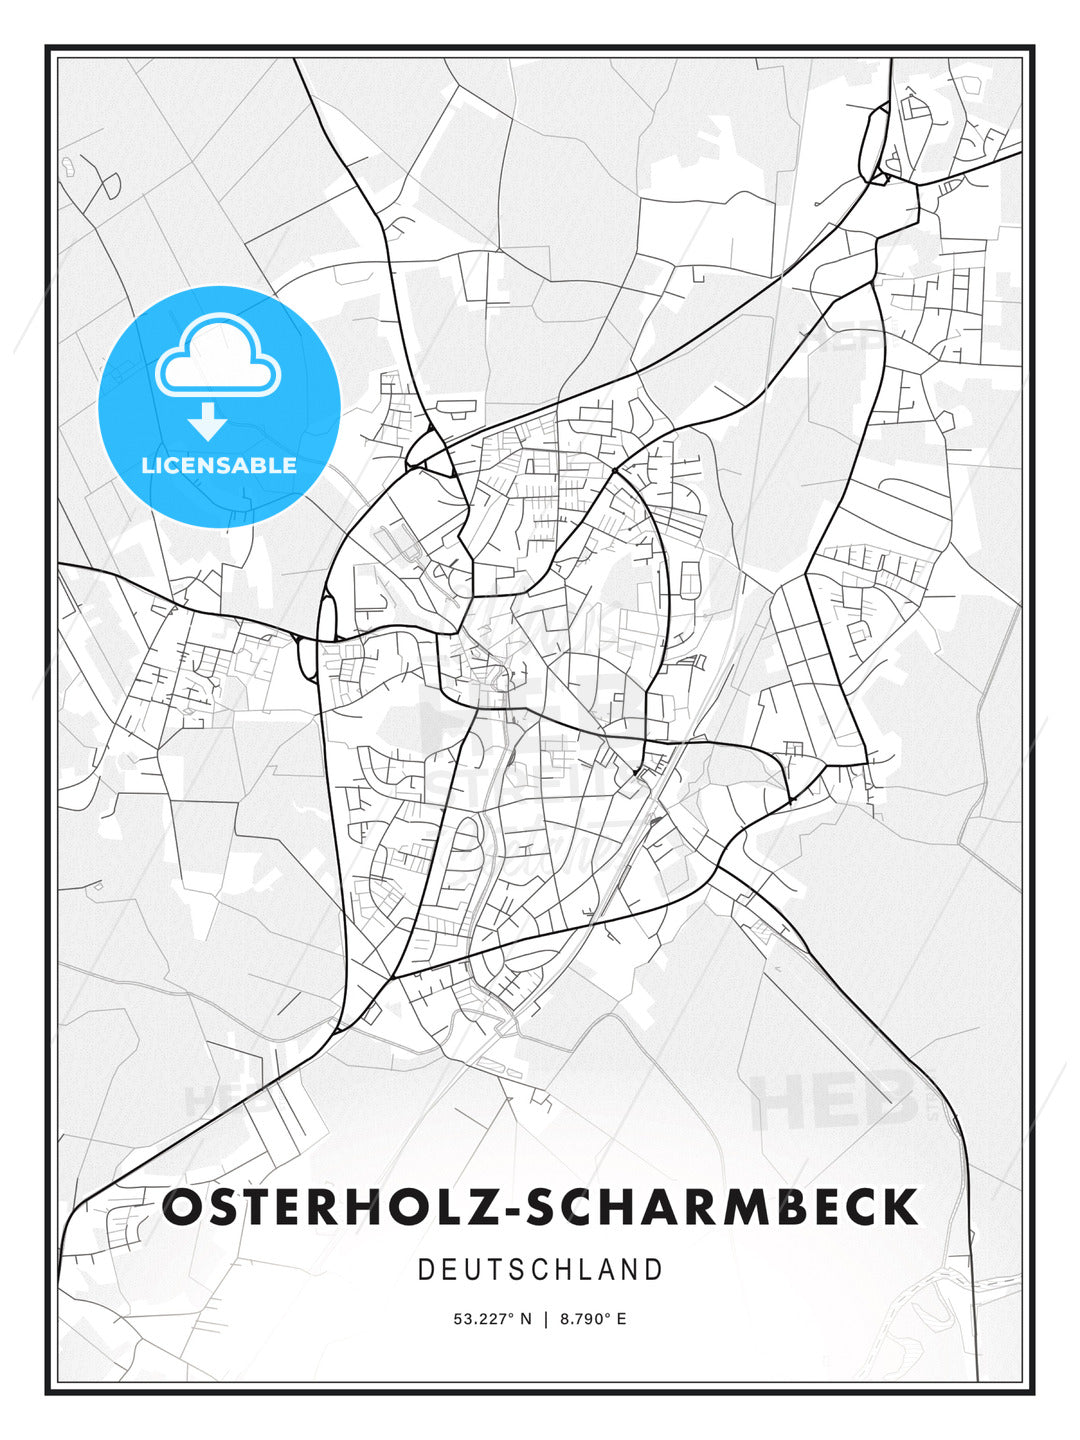 Osterholz-Scharmbeck, Germany, Modern Print Template in Various Formats - HEBSTREITS Sketches